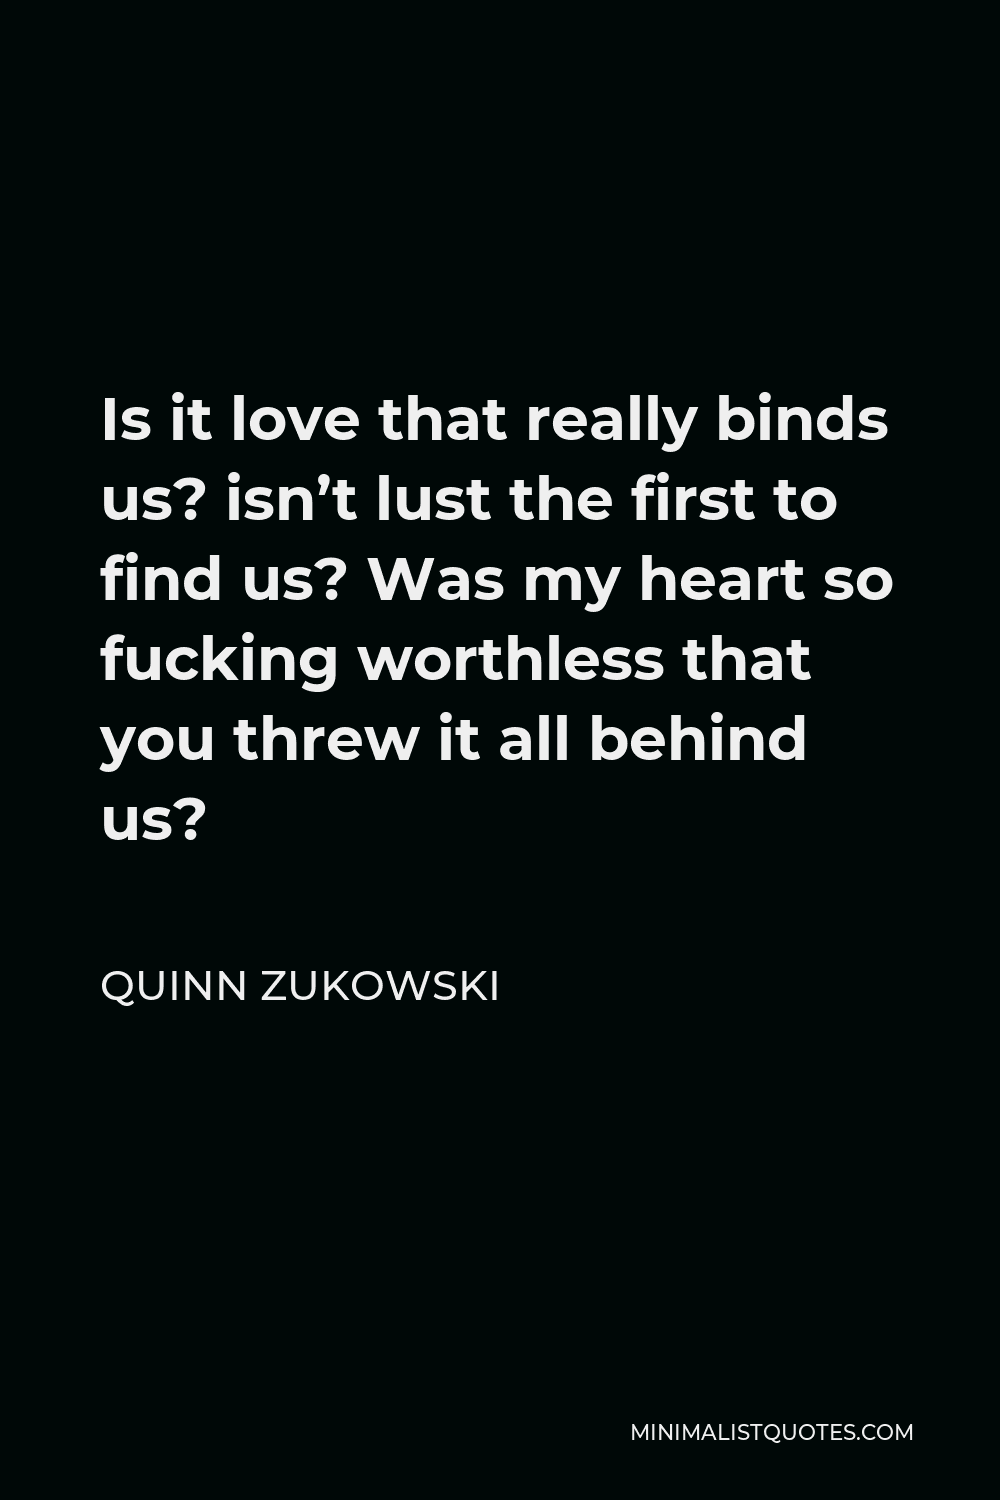 Quinn Zukowski Quote - Is it love that really binds us? isn’t lust the first to find us? Was my heart so fucking worthless that you threw it all behind us?